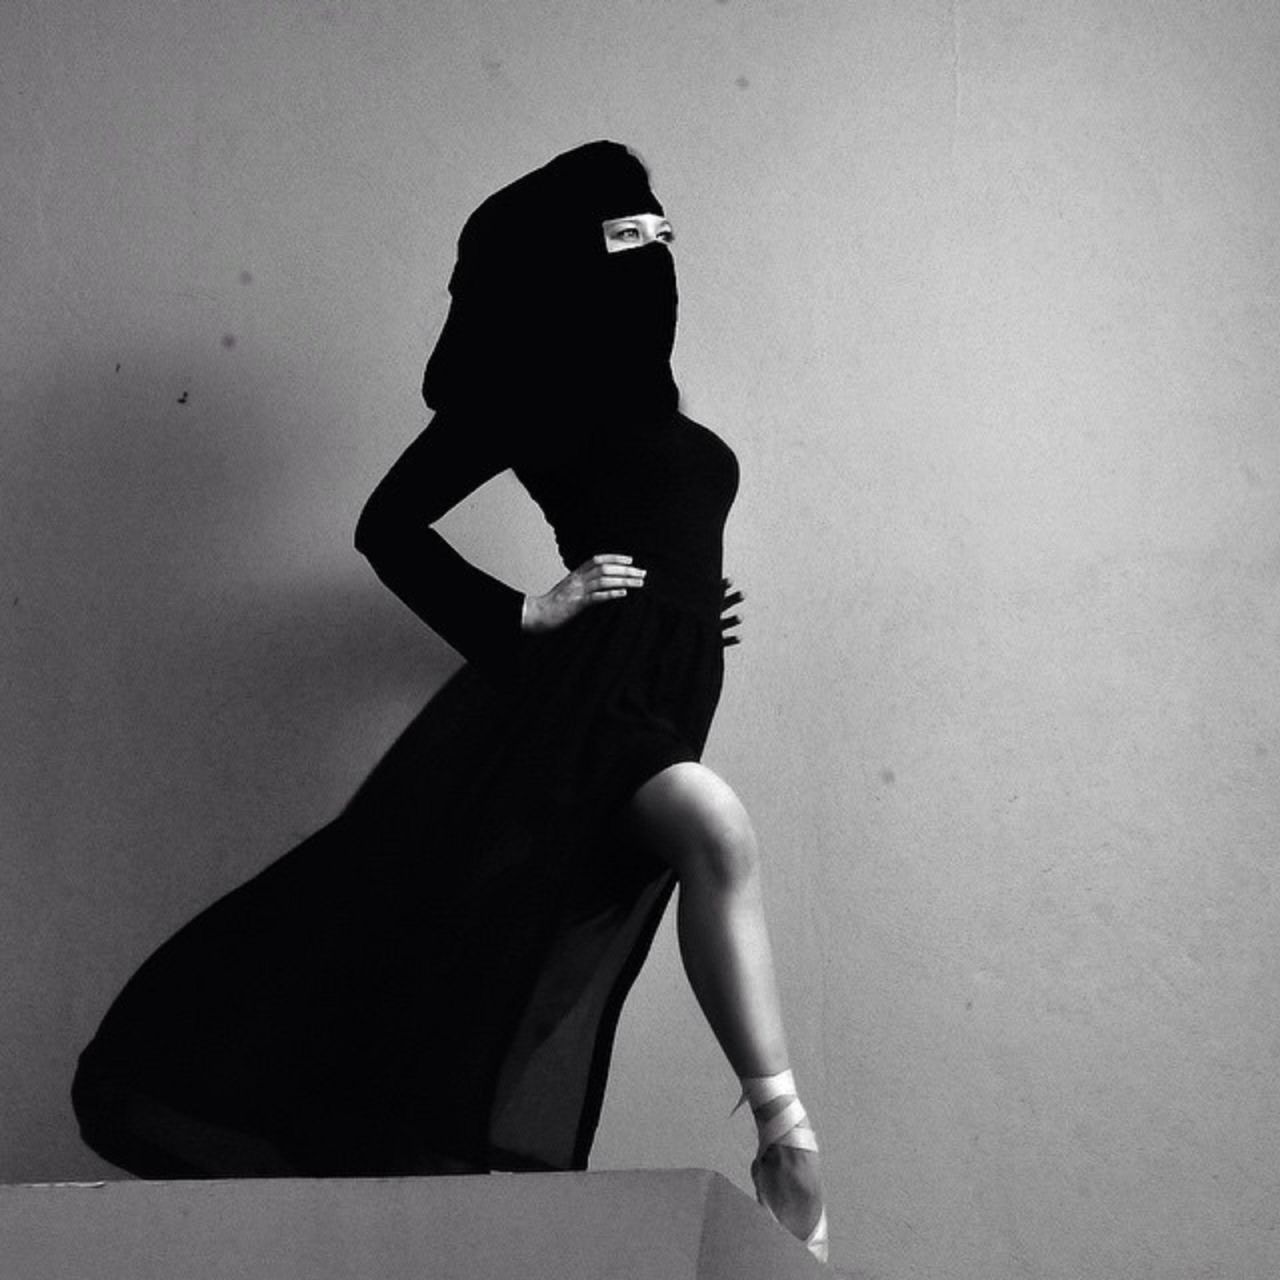 When singer Alicia Keys reposted this photo on her Twitter account  Al Sharji experienced a backlash from Muslim conservatives about the pose of the woman. Al Sharji says he took the picture to make the statement that women should have the freedom to choose their passions, regardless of the restrictions placed upon them. 